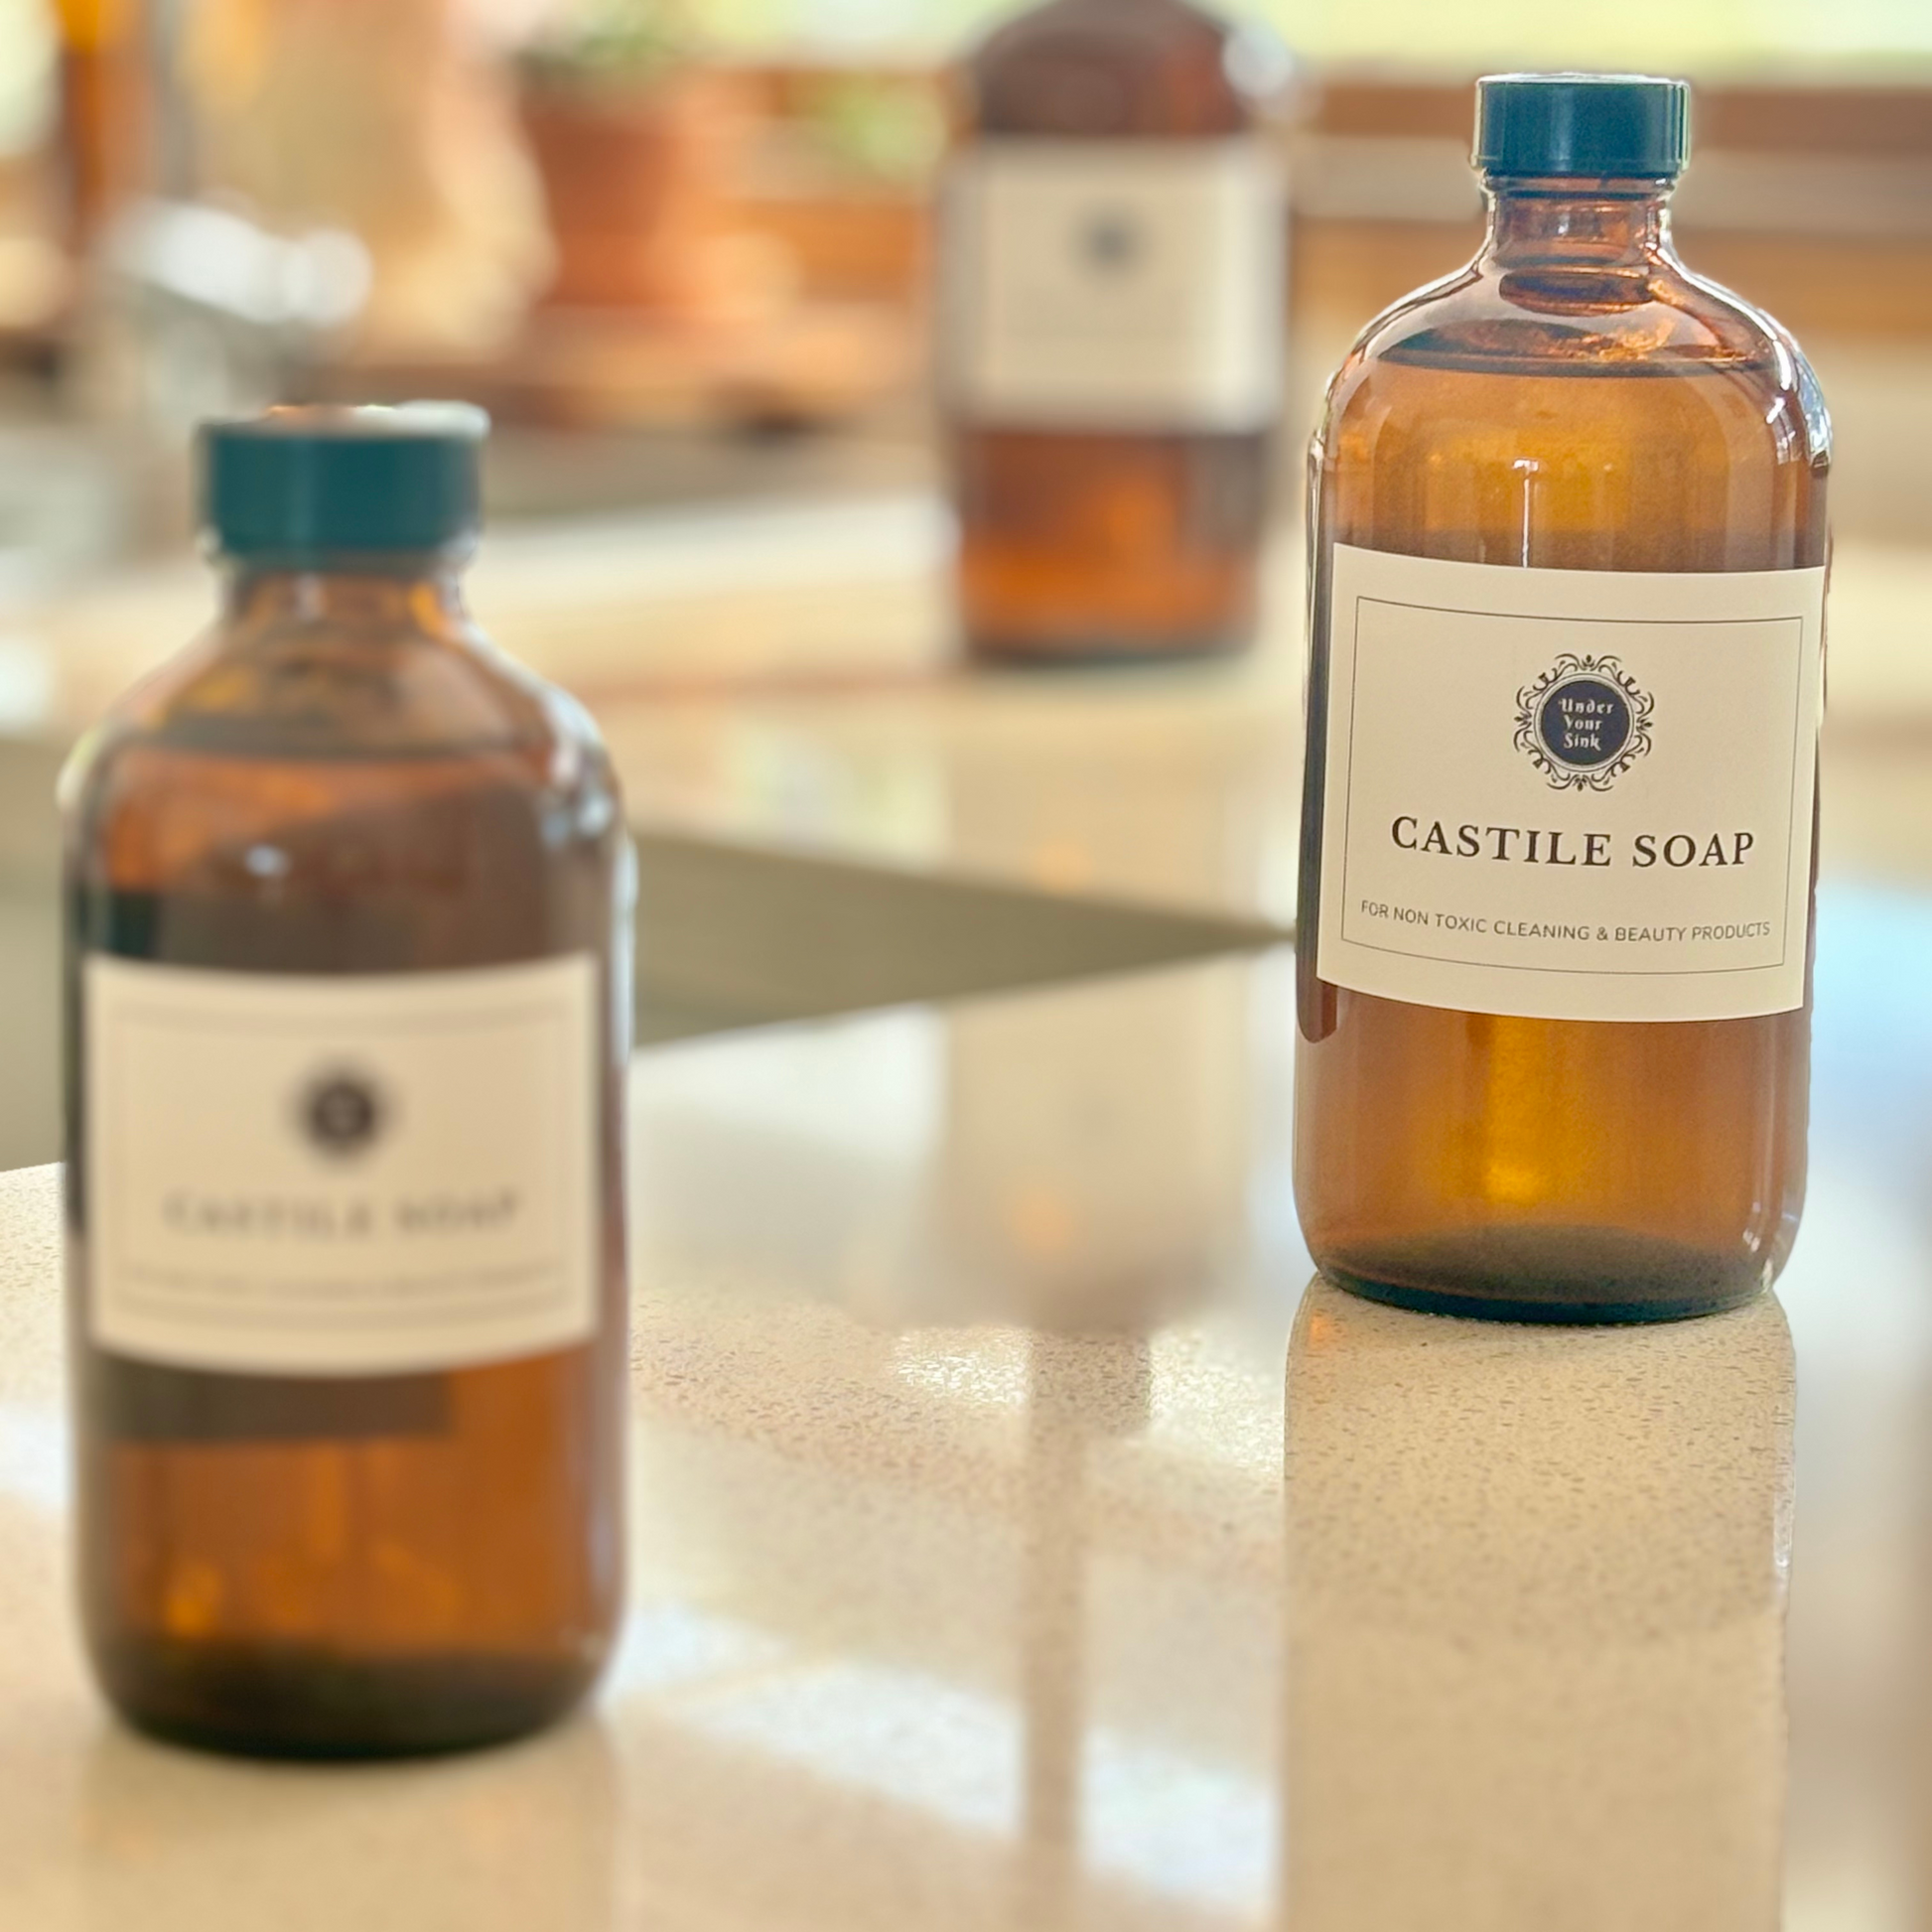 A collection of 3 amber glass bottles in 1litre, 500ml and 250ml sizes. Each has a simple white label with Under your Sink Logo and description Castile Soap – For non toxic cleaning and beauty products. The bottles are set in a kitchen with a blurred background a focus on the 500ml bottle. It is a product image for website as this is for sale in various sizes, online with Australia wide delivery.